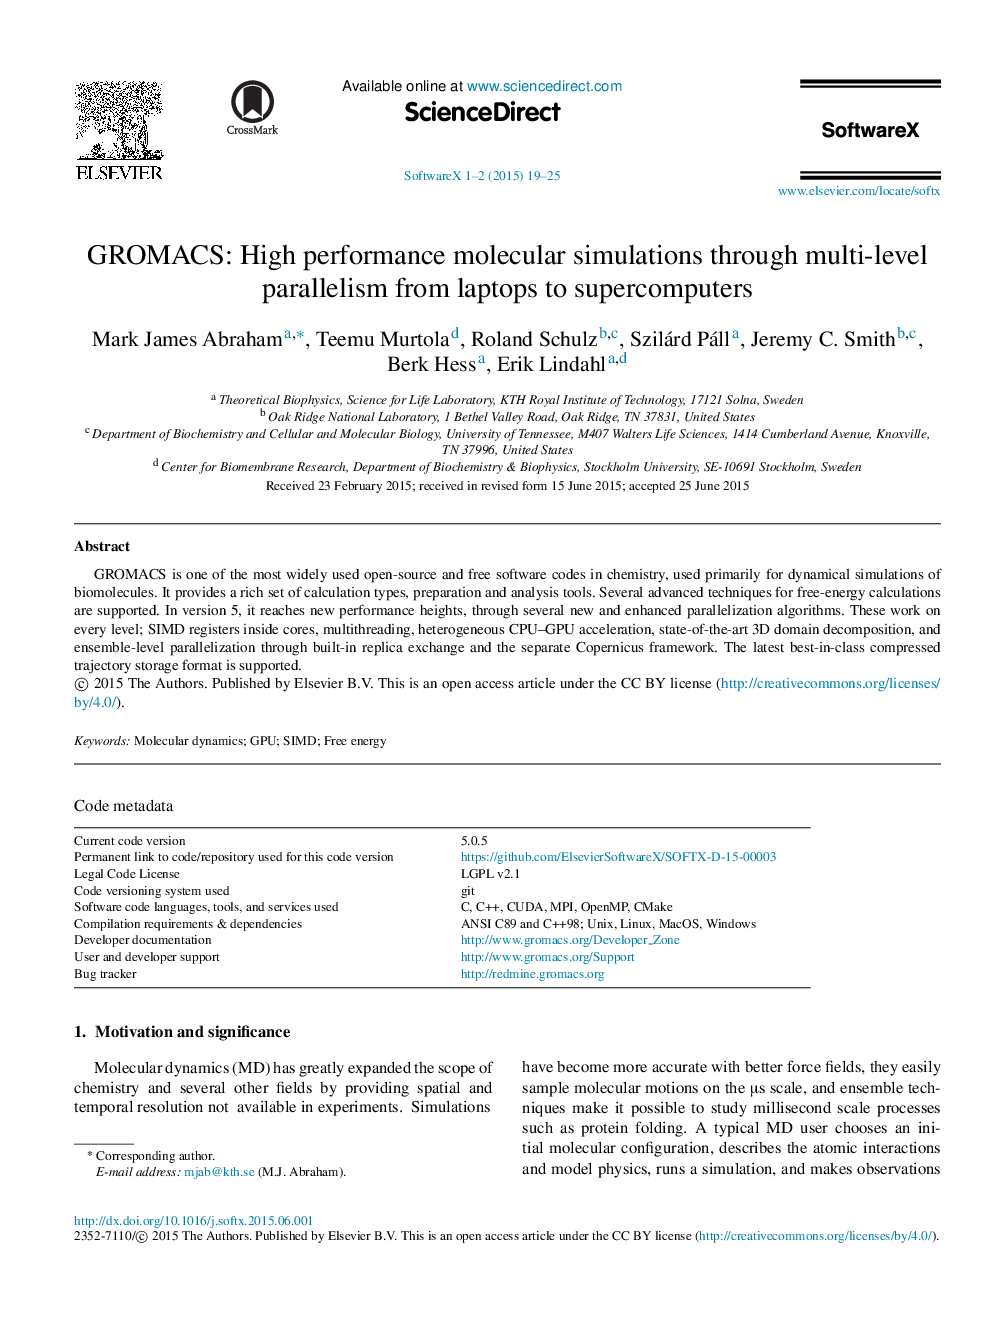 GROMACS: High performance molecular simulations through multi-level parallelism from laptops to supercomputers